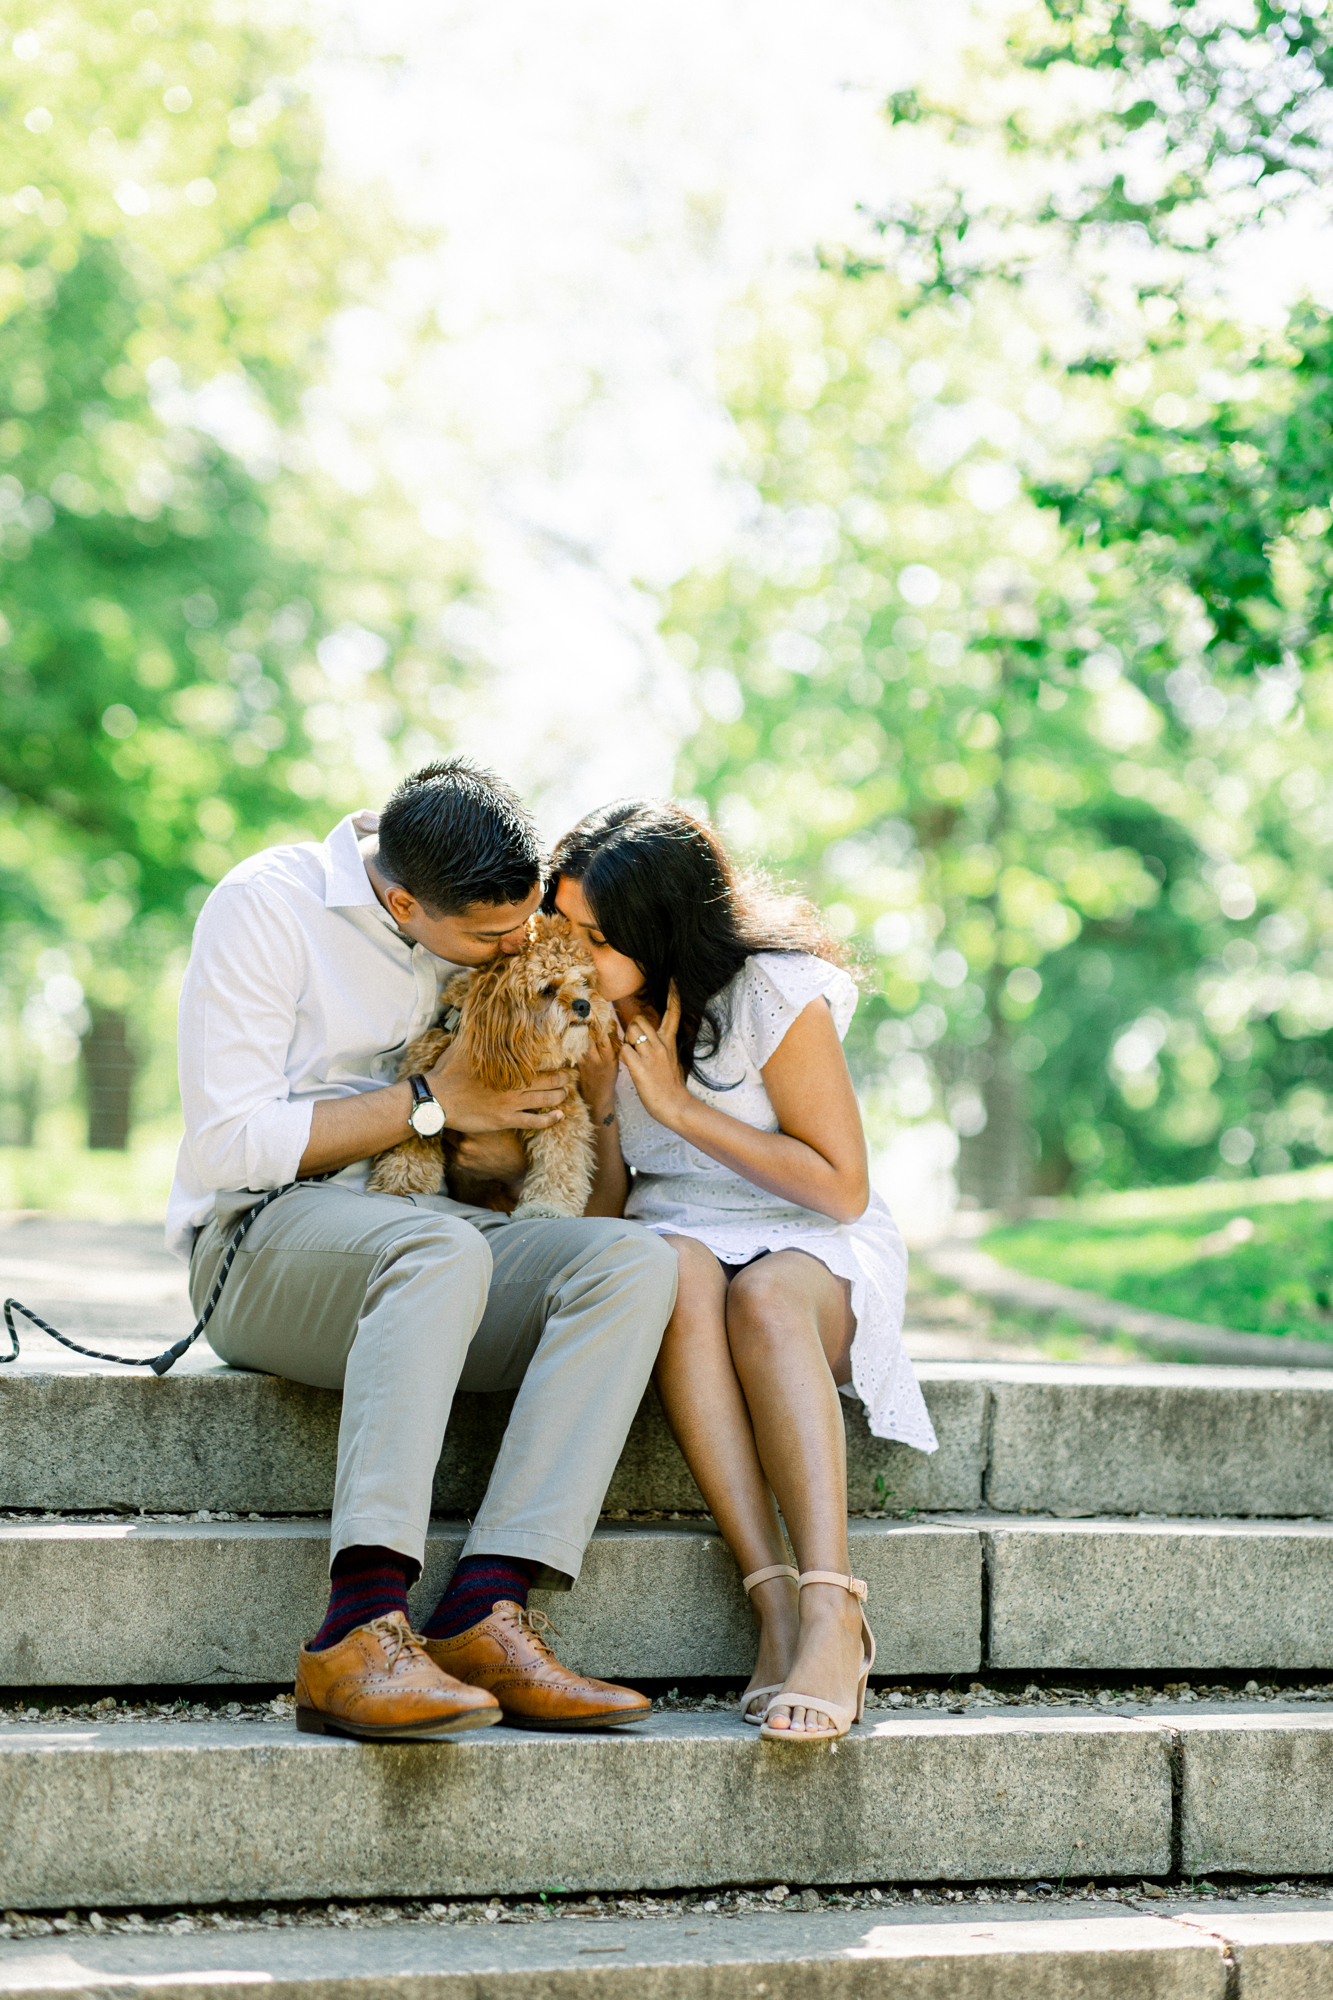 Special Carl Shurz Park Engagement Photos in Summery New York